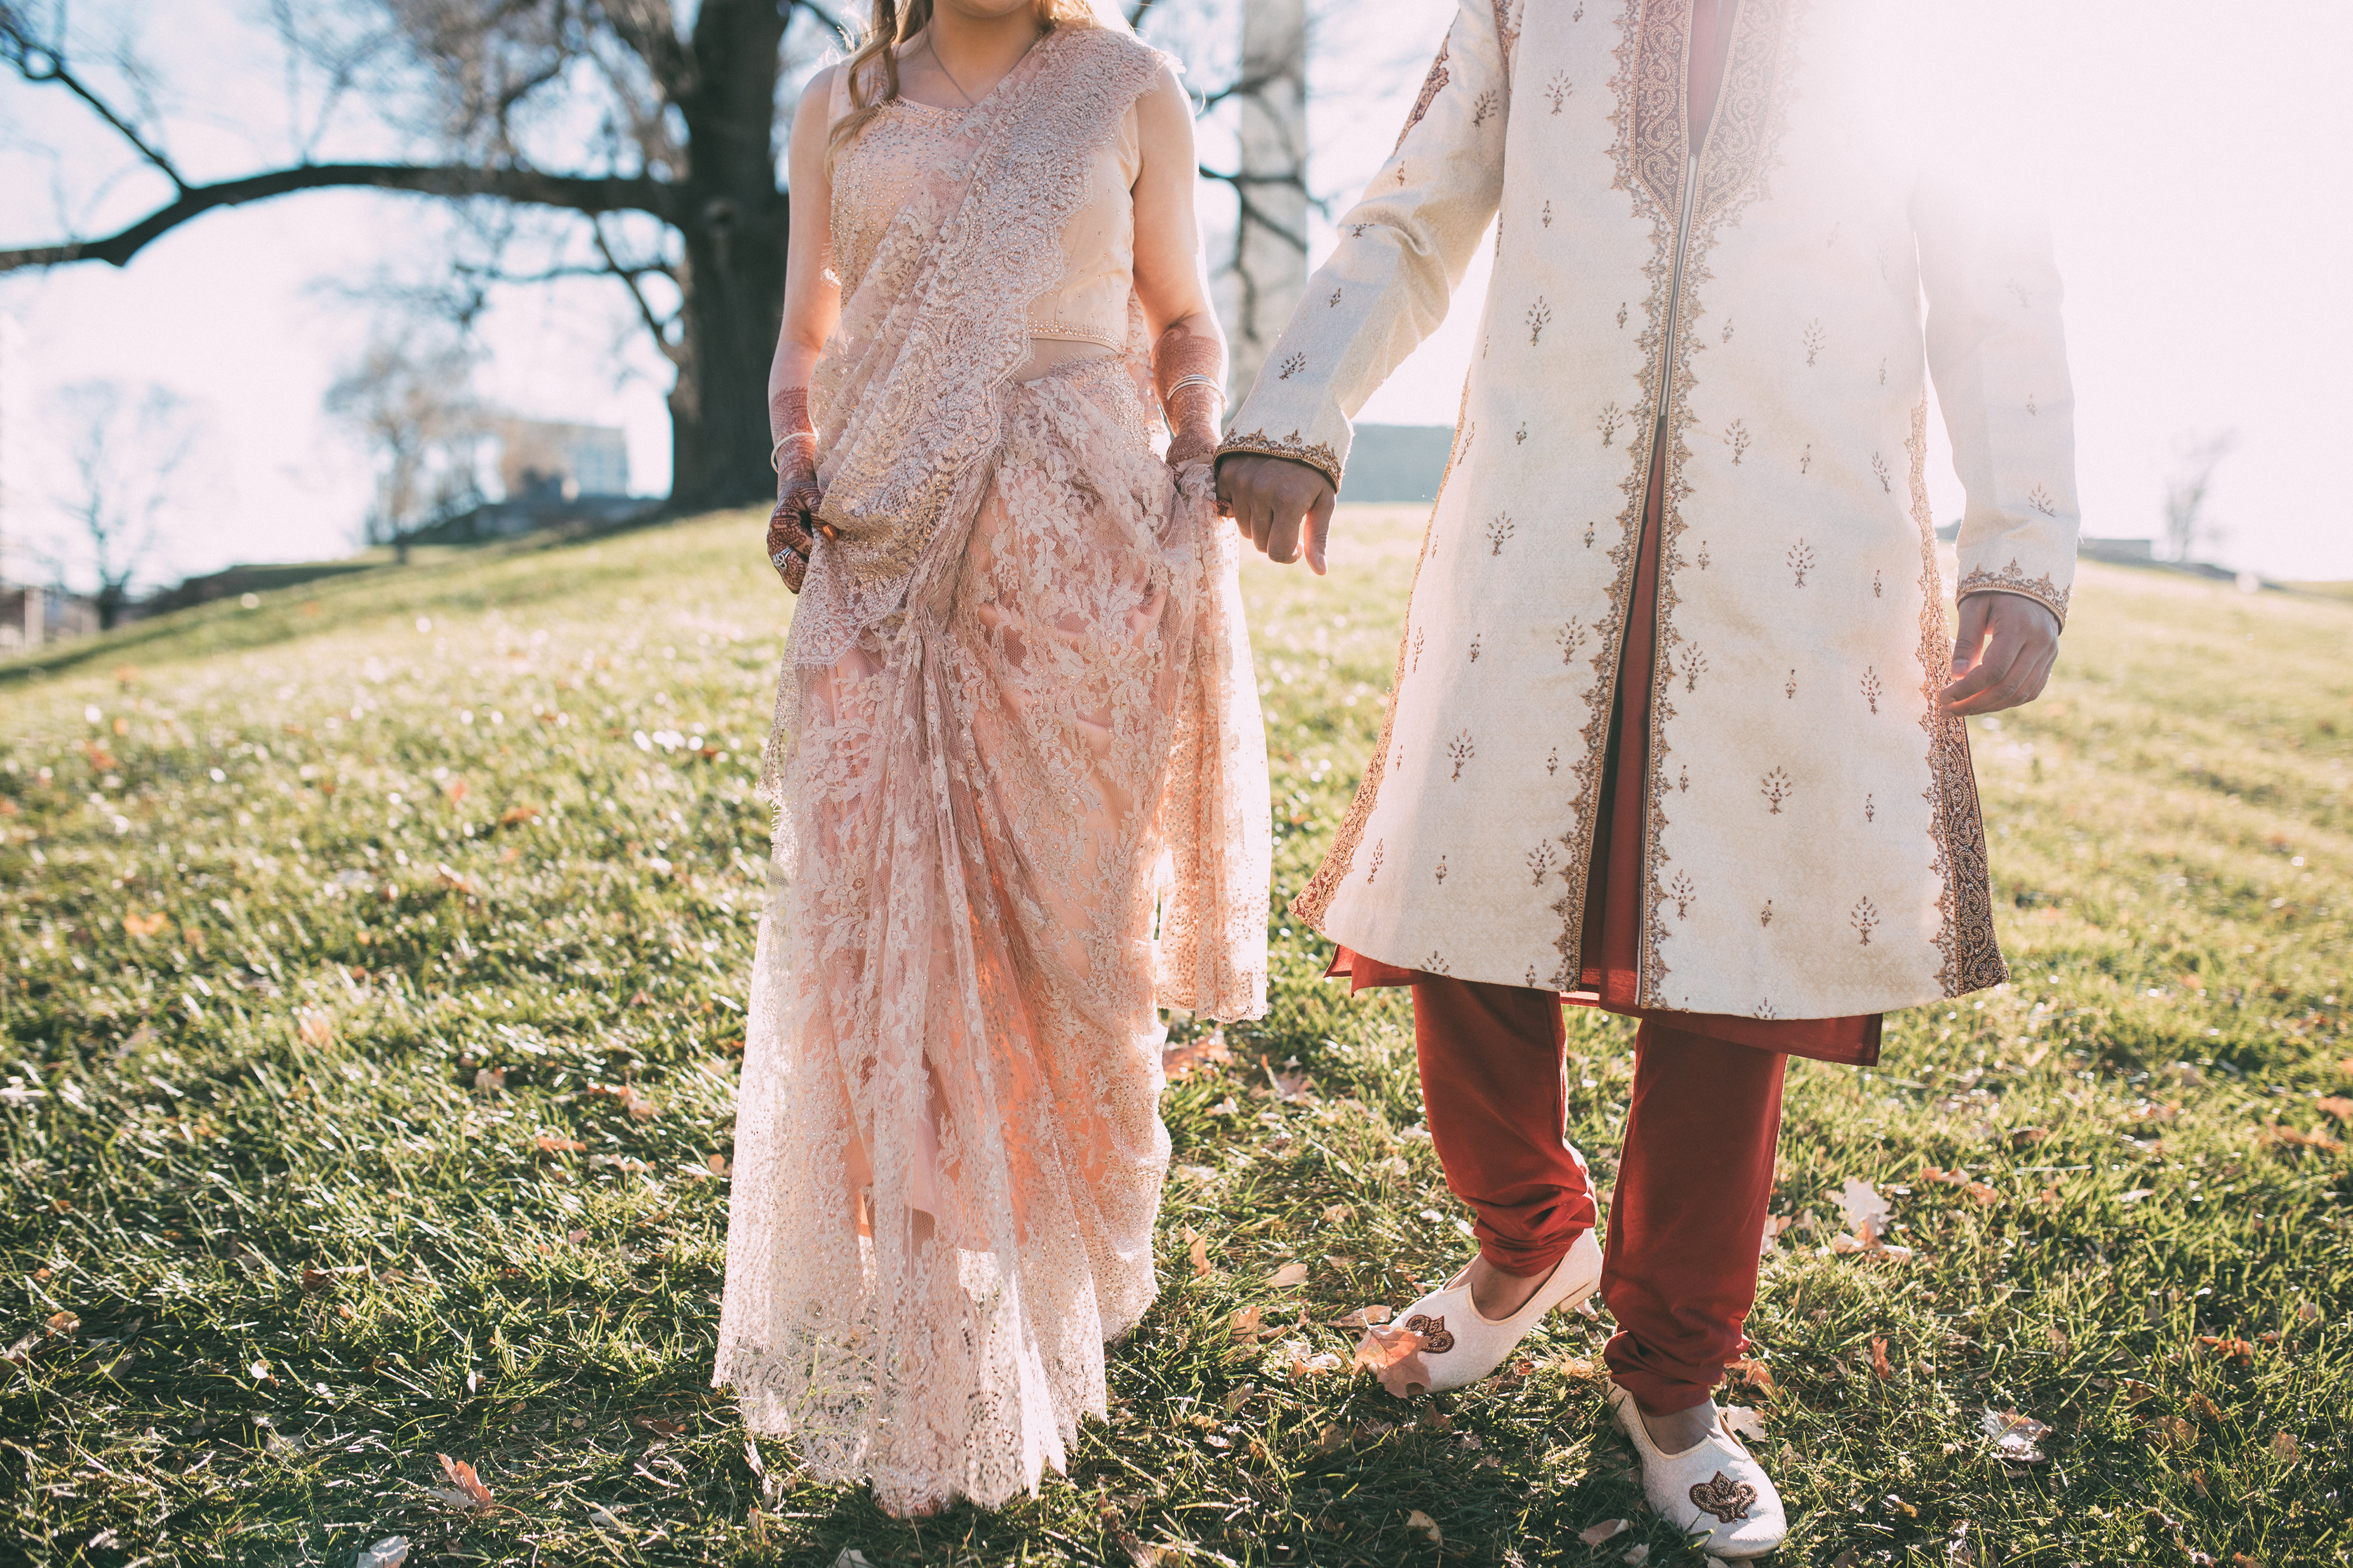 Real Weddings: Courtney + Nischal’s Traditional Indian Wedding at Union Station